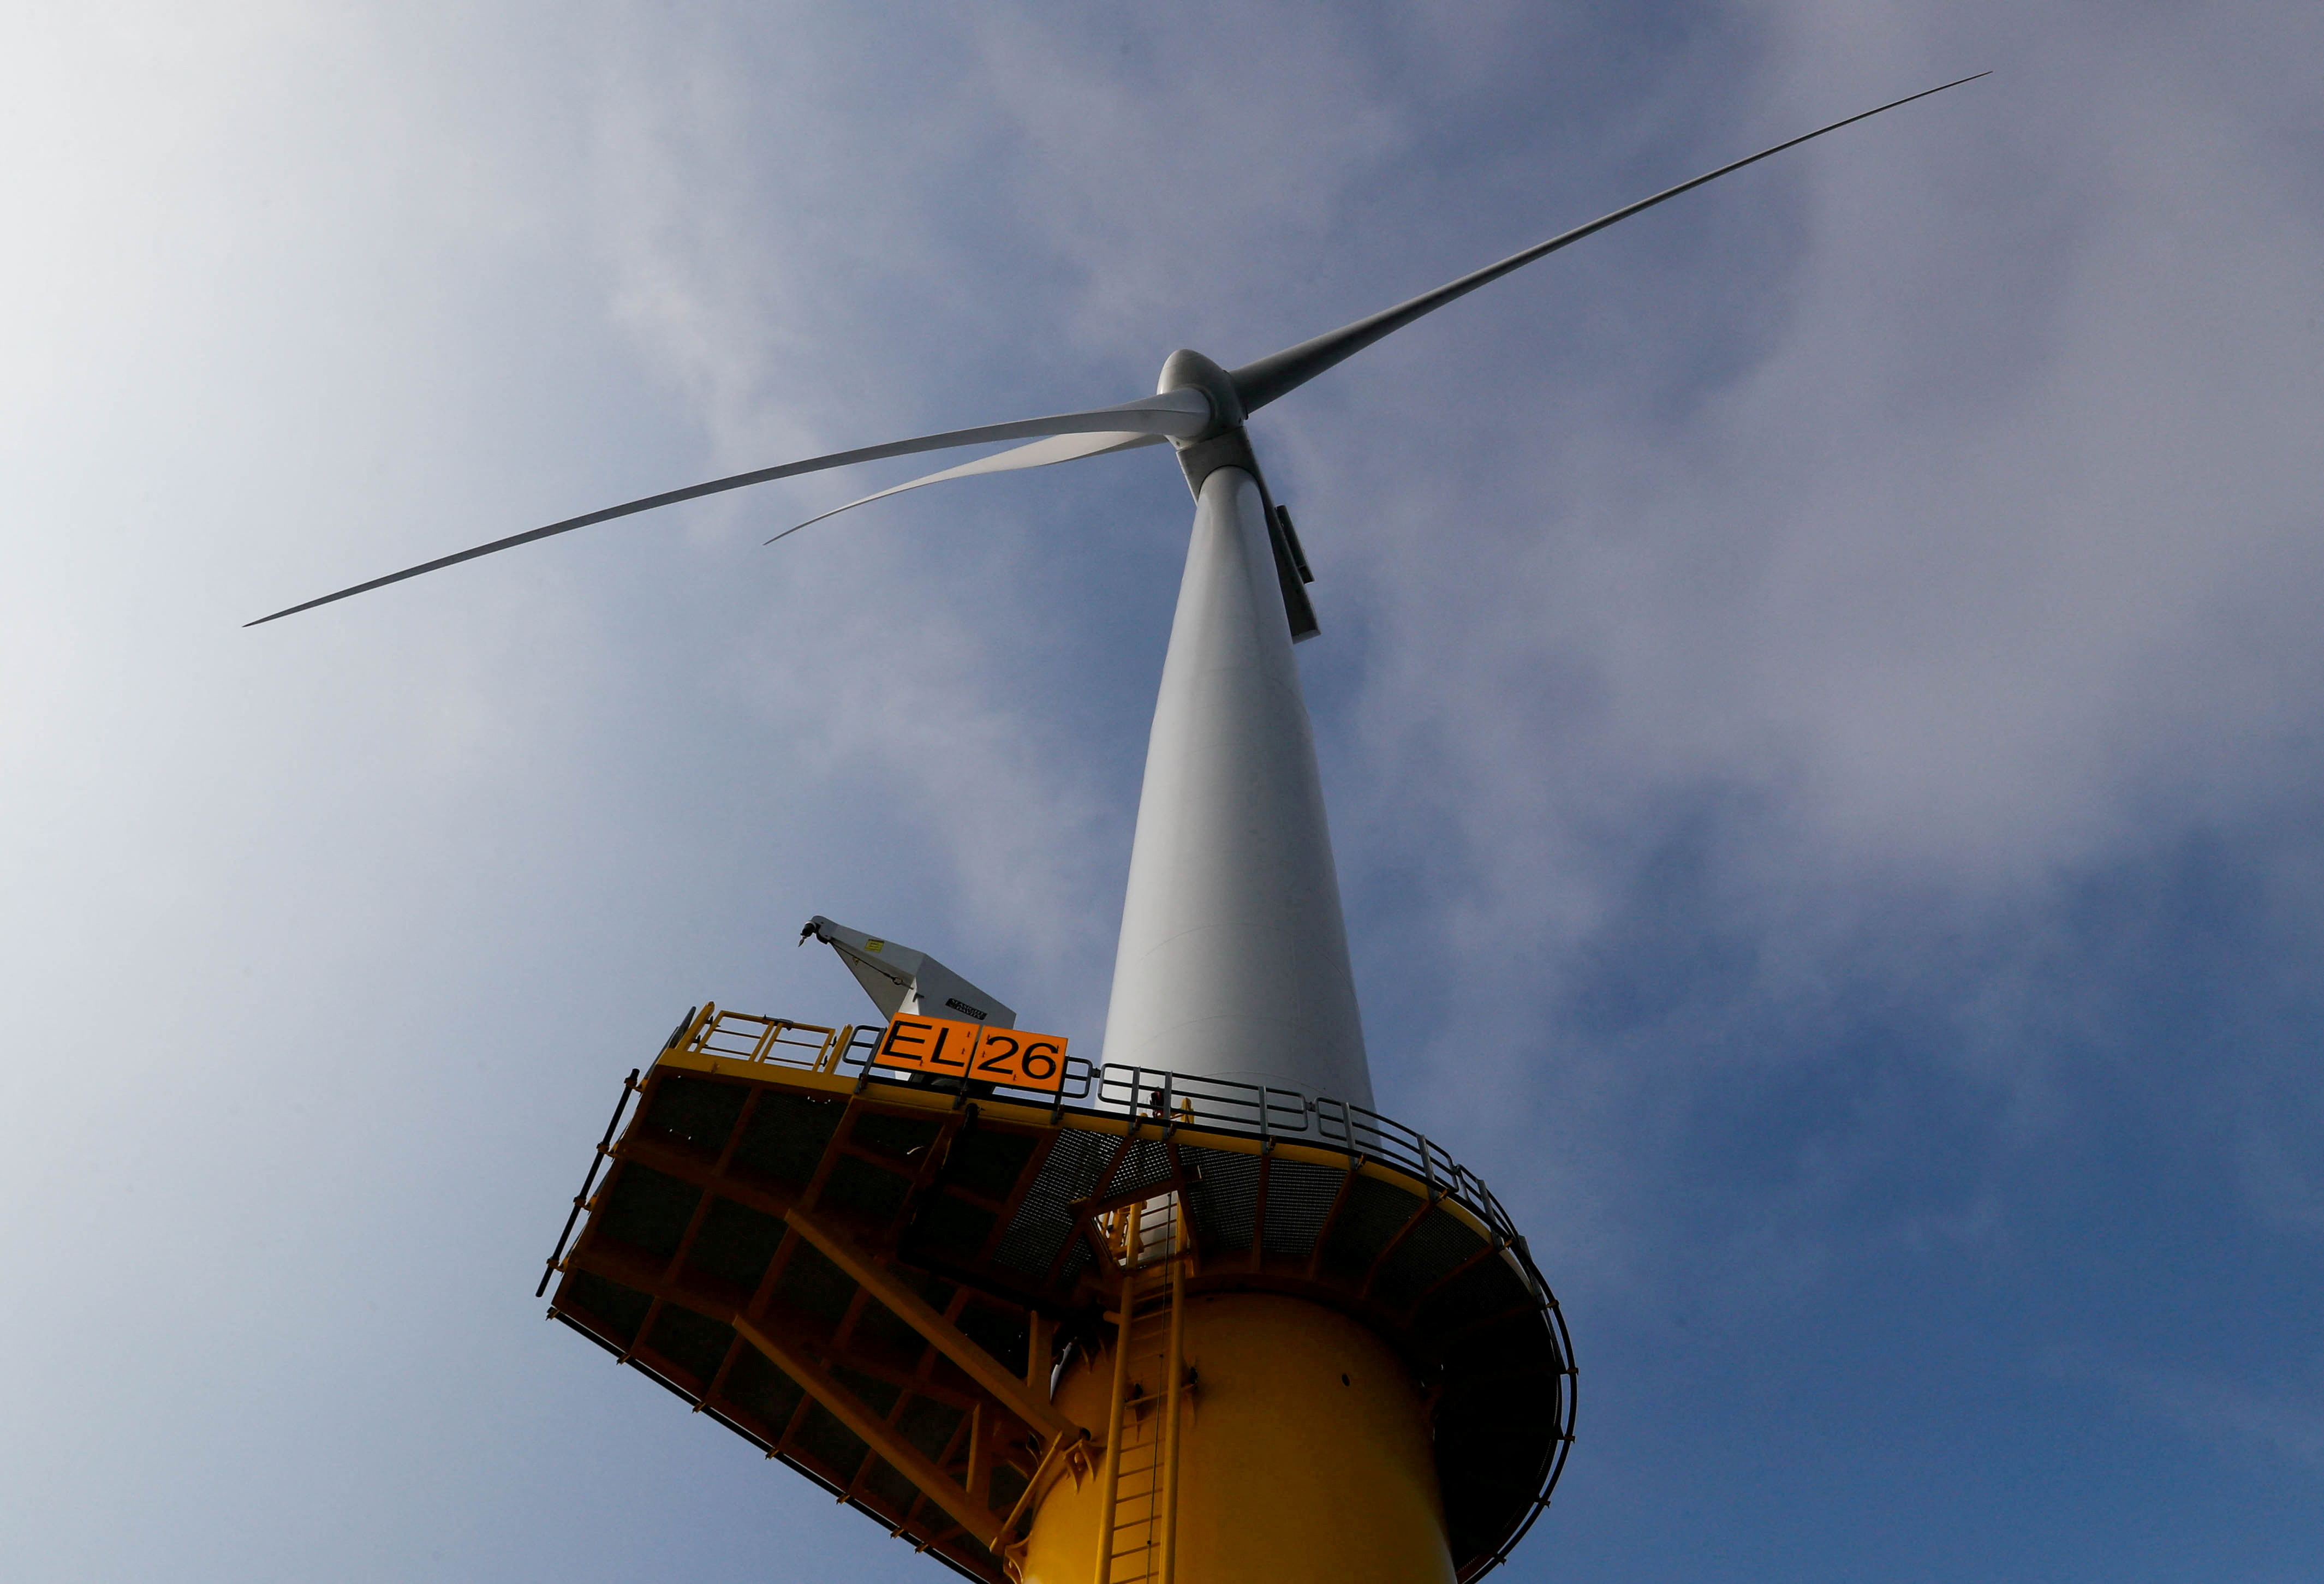 A power-generating windmill turbine is seen at the Eneco Luchterduinen offshore wind farm near Amsterdam